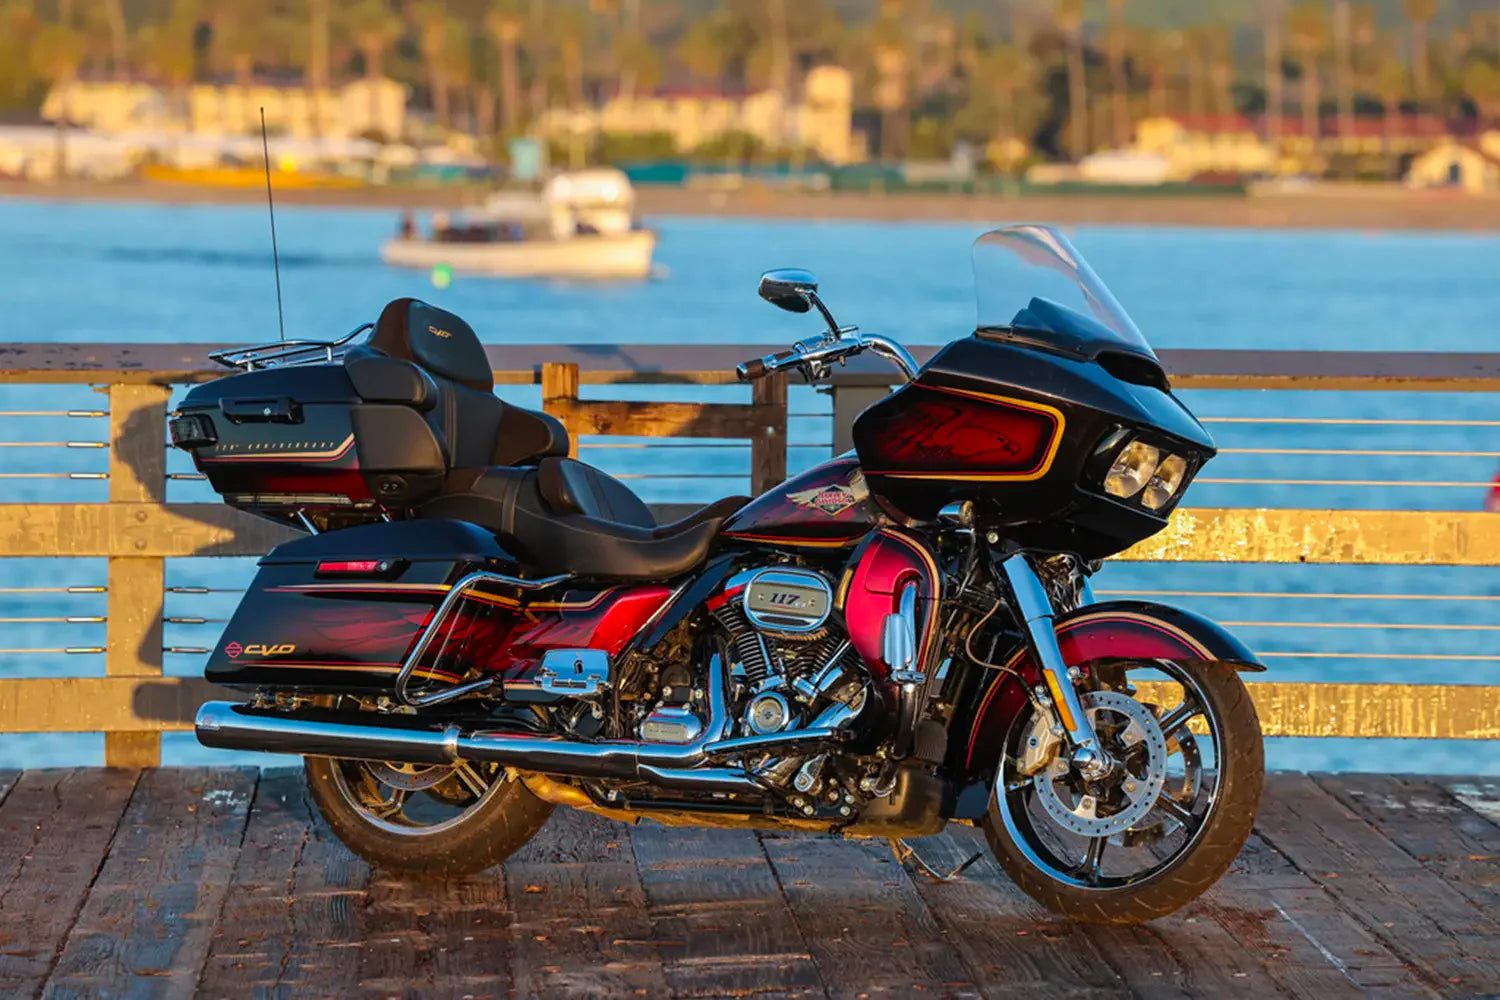 2023 Road Glide vs 2023 Road King: Which Harley-Davidson Touring Motorcycle is Better?